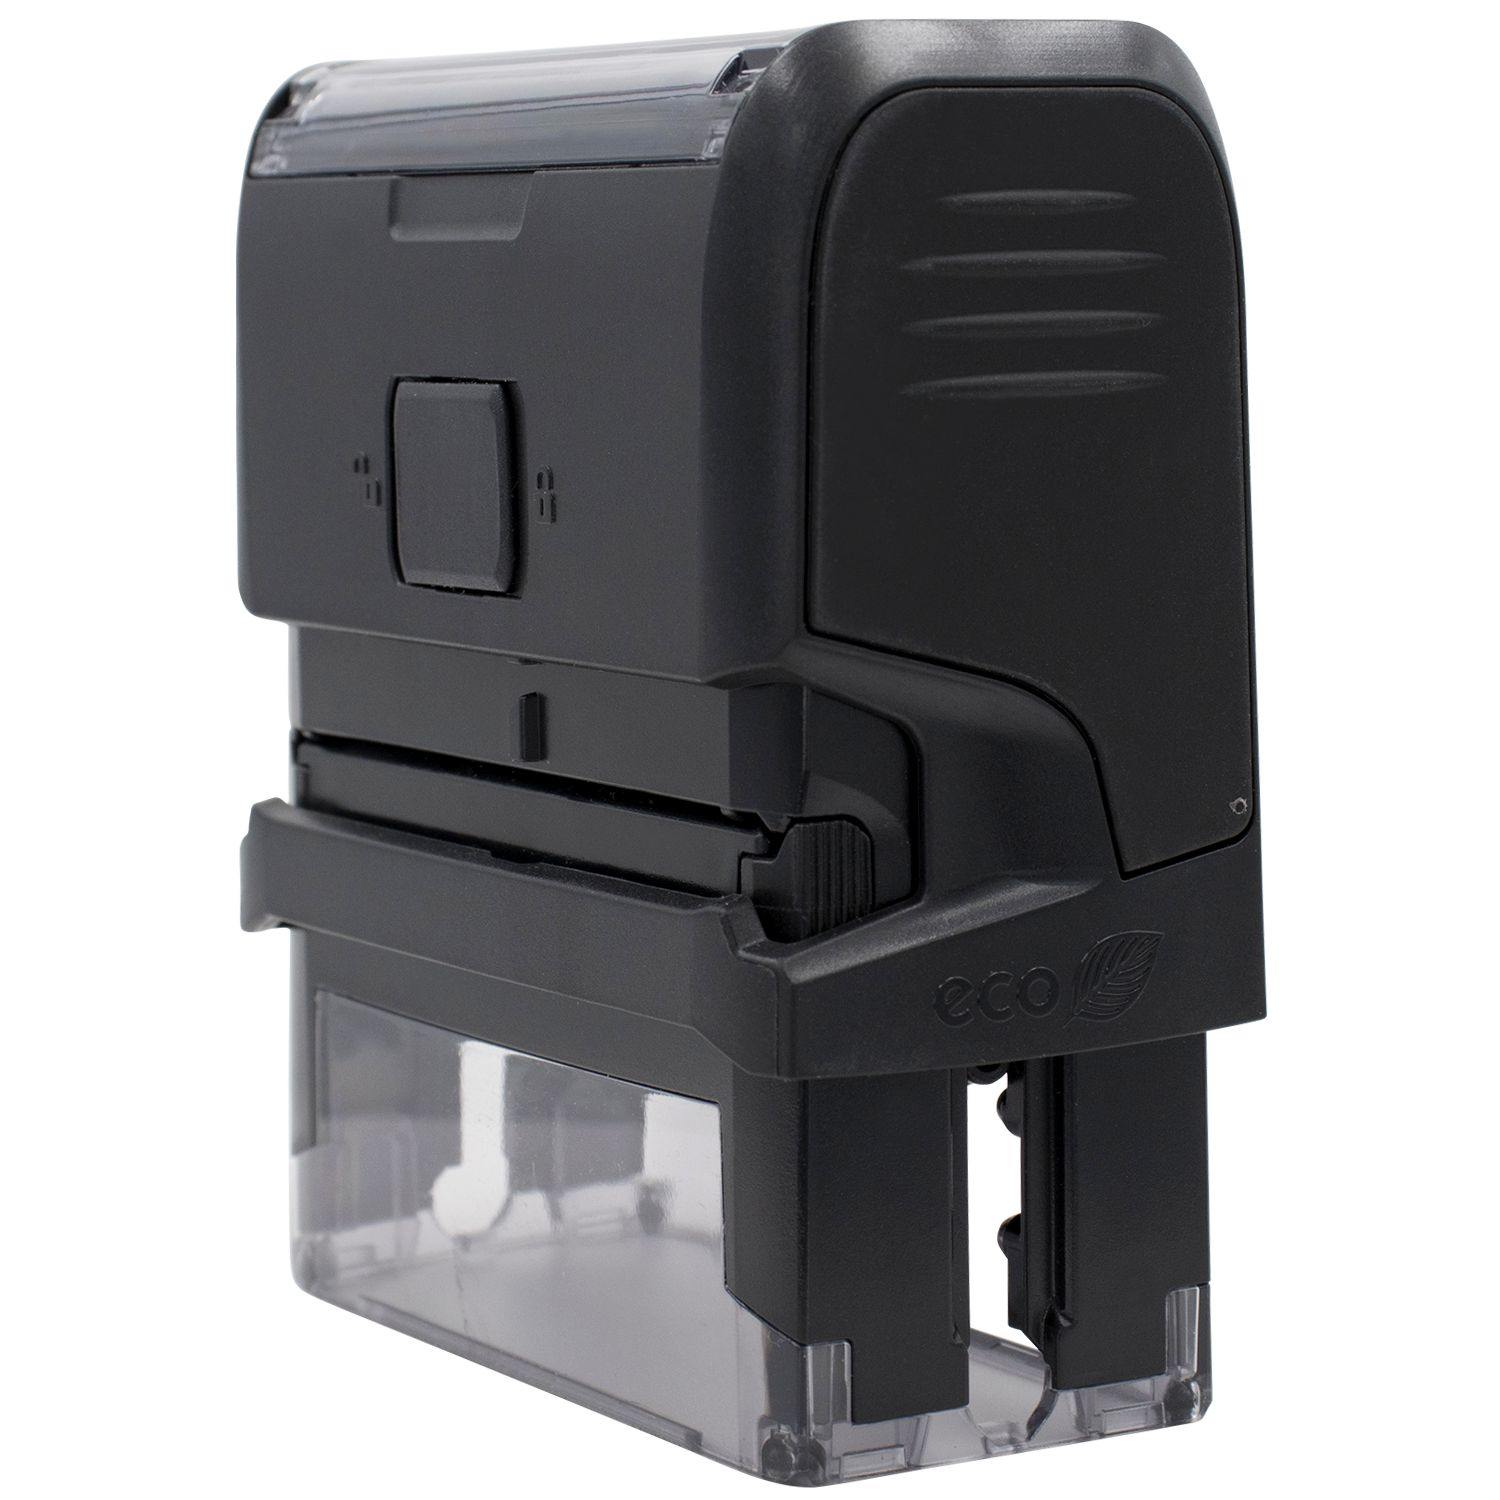 Side View of Large Self Inking Broker Copy Stamp at an Angle